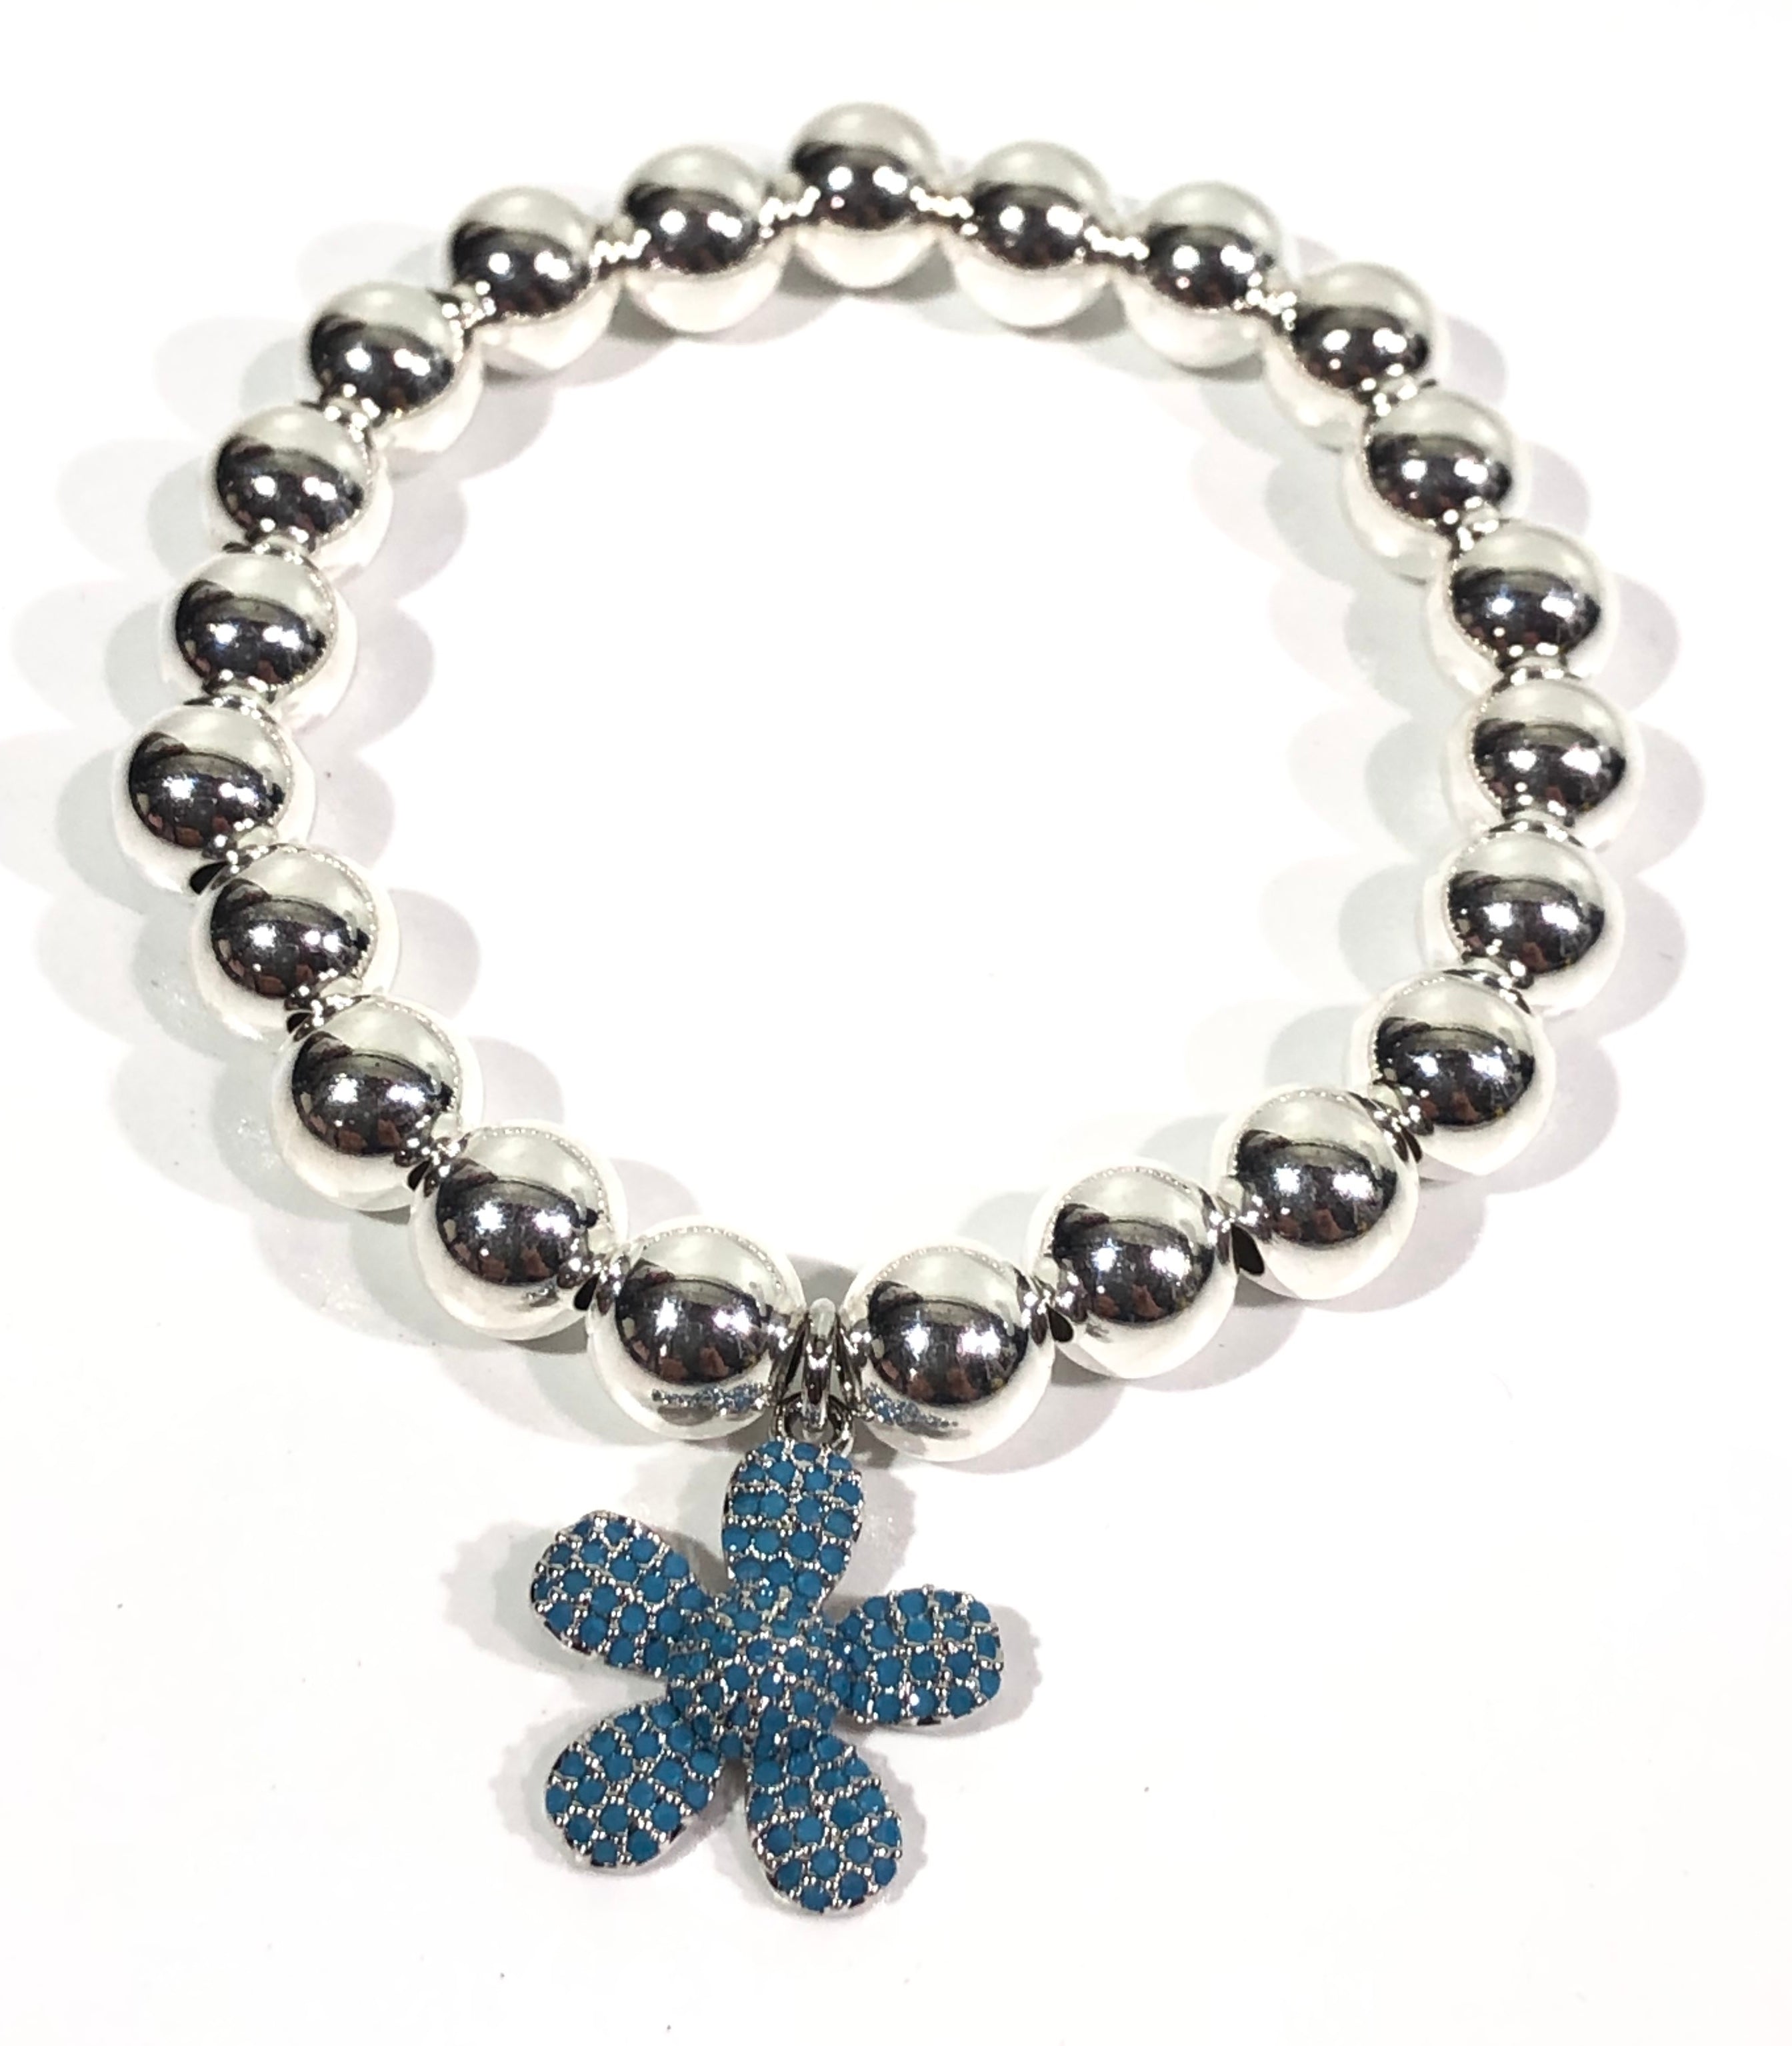 8mm Sterling Silver Bracelet with Blue Jeweled Flower Hanging Charm